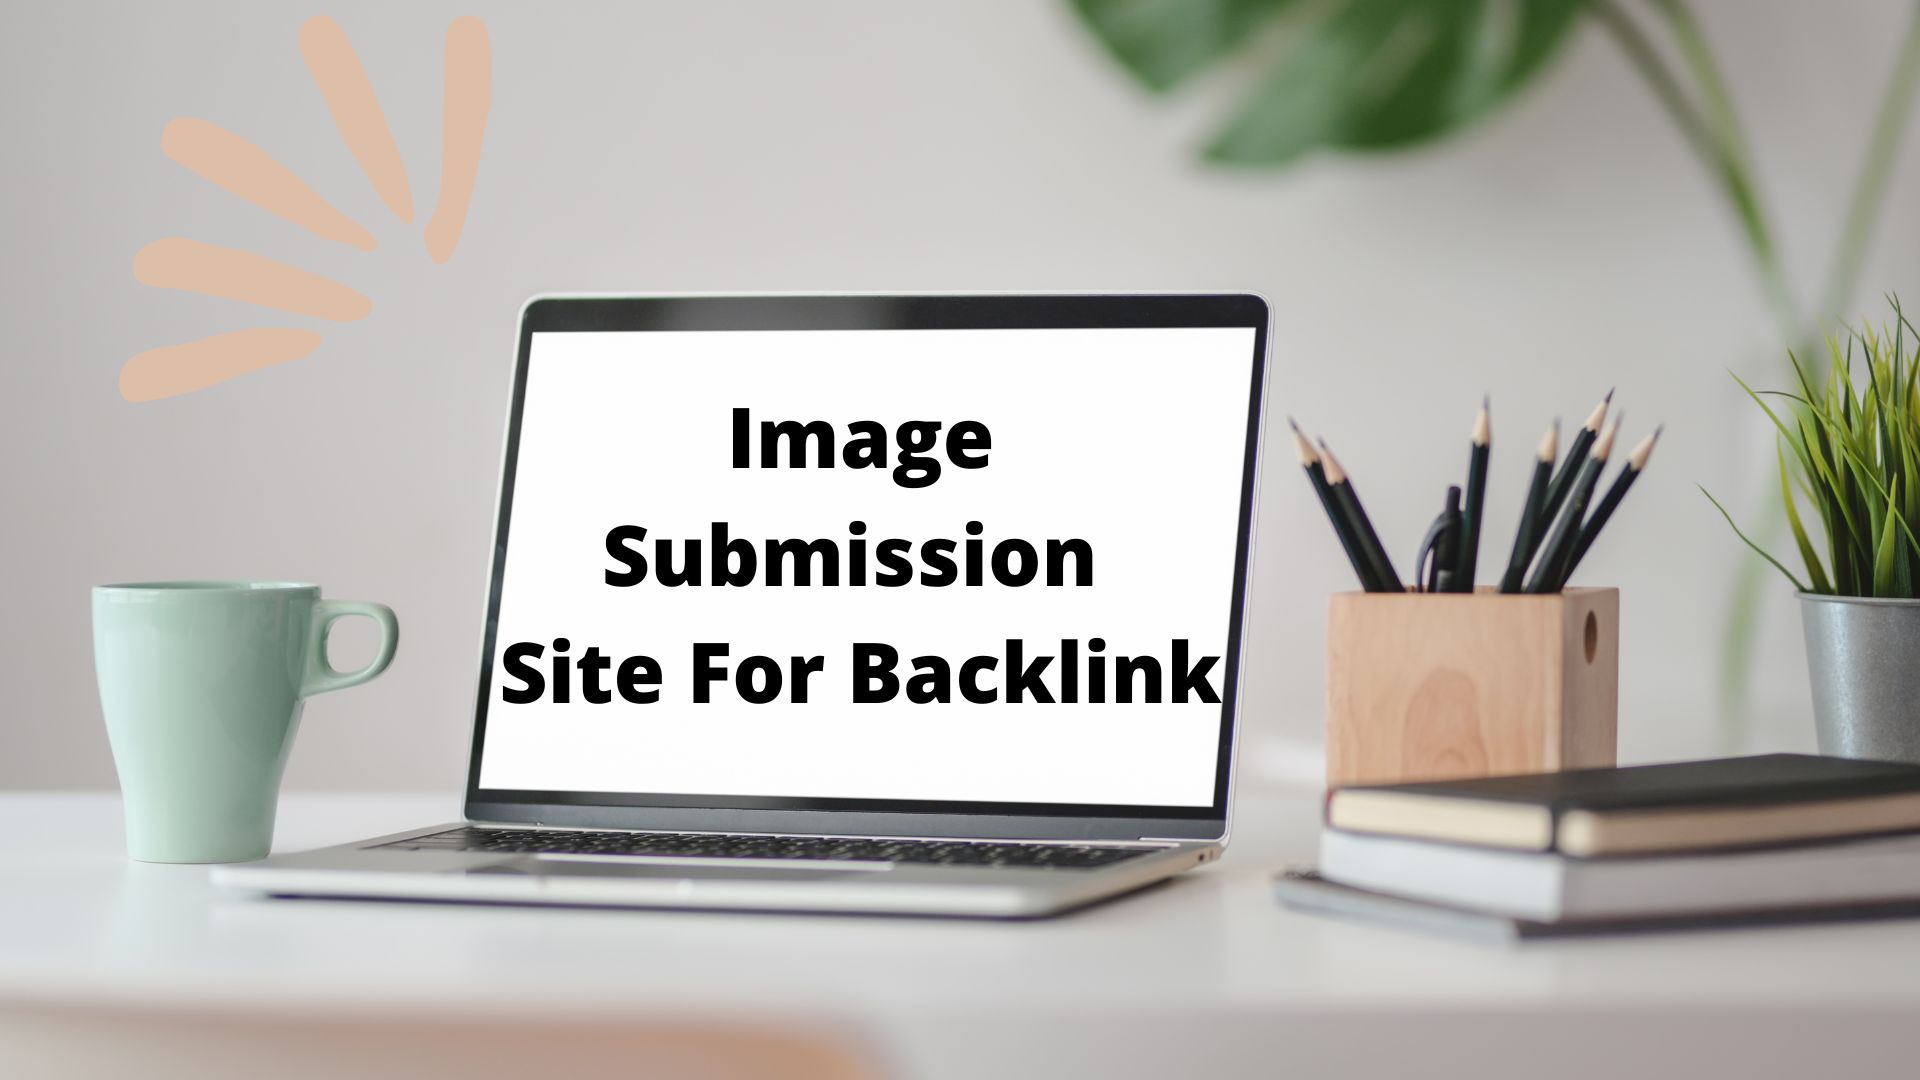 Image Submission Site for Backlink SEO